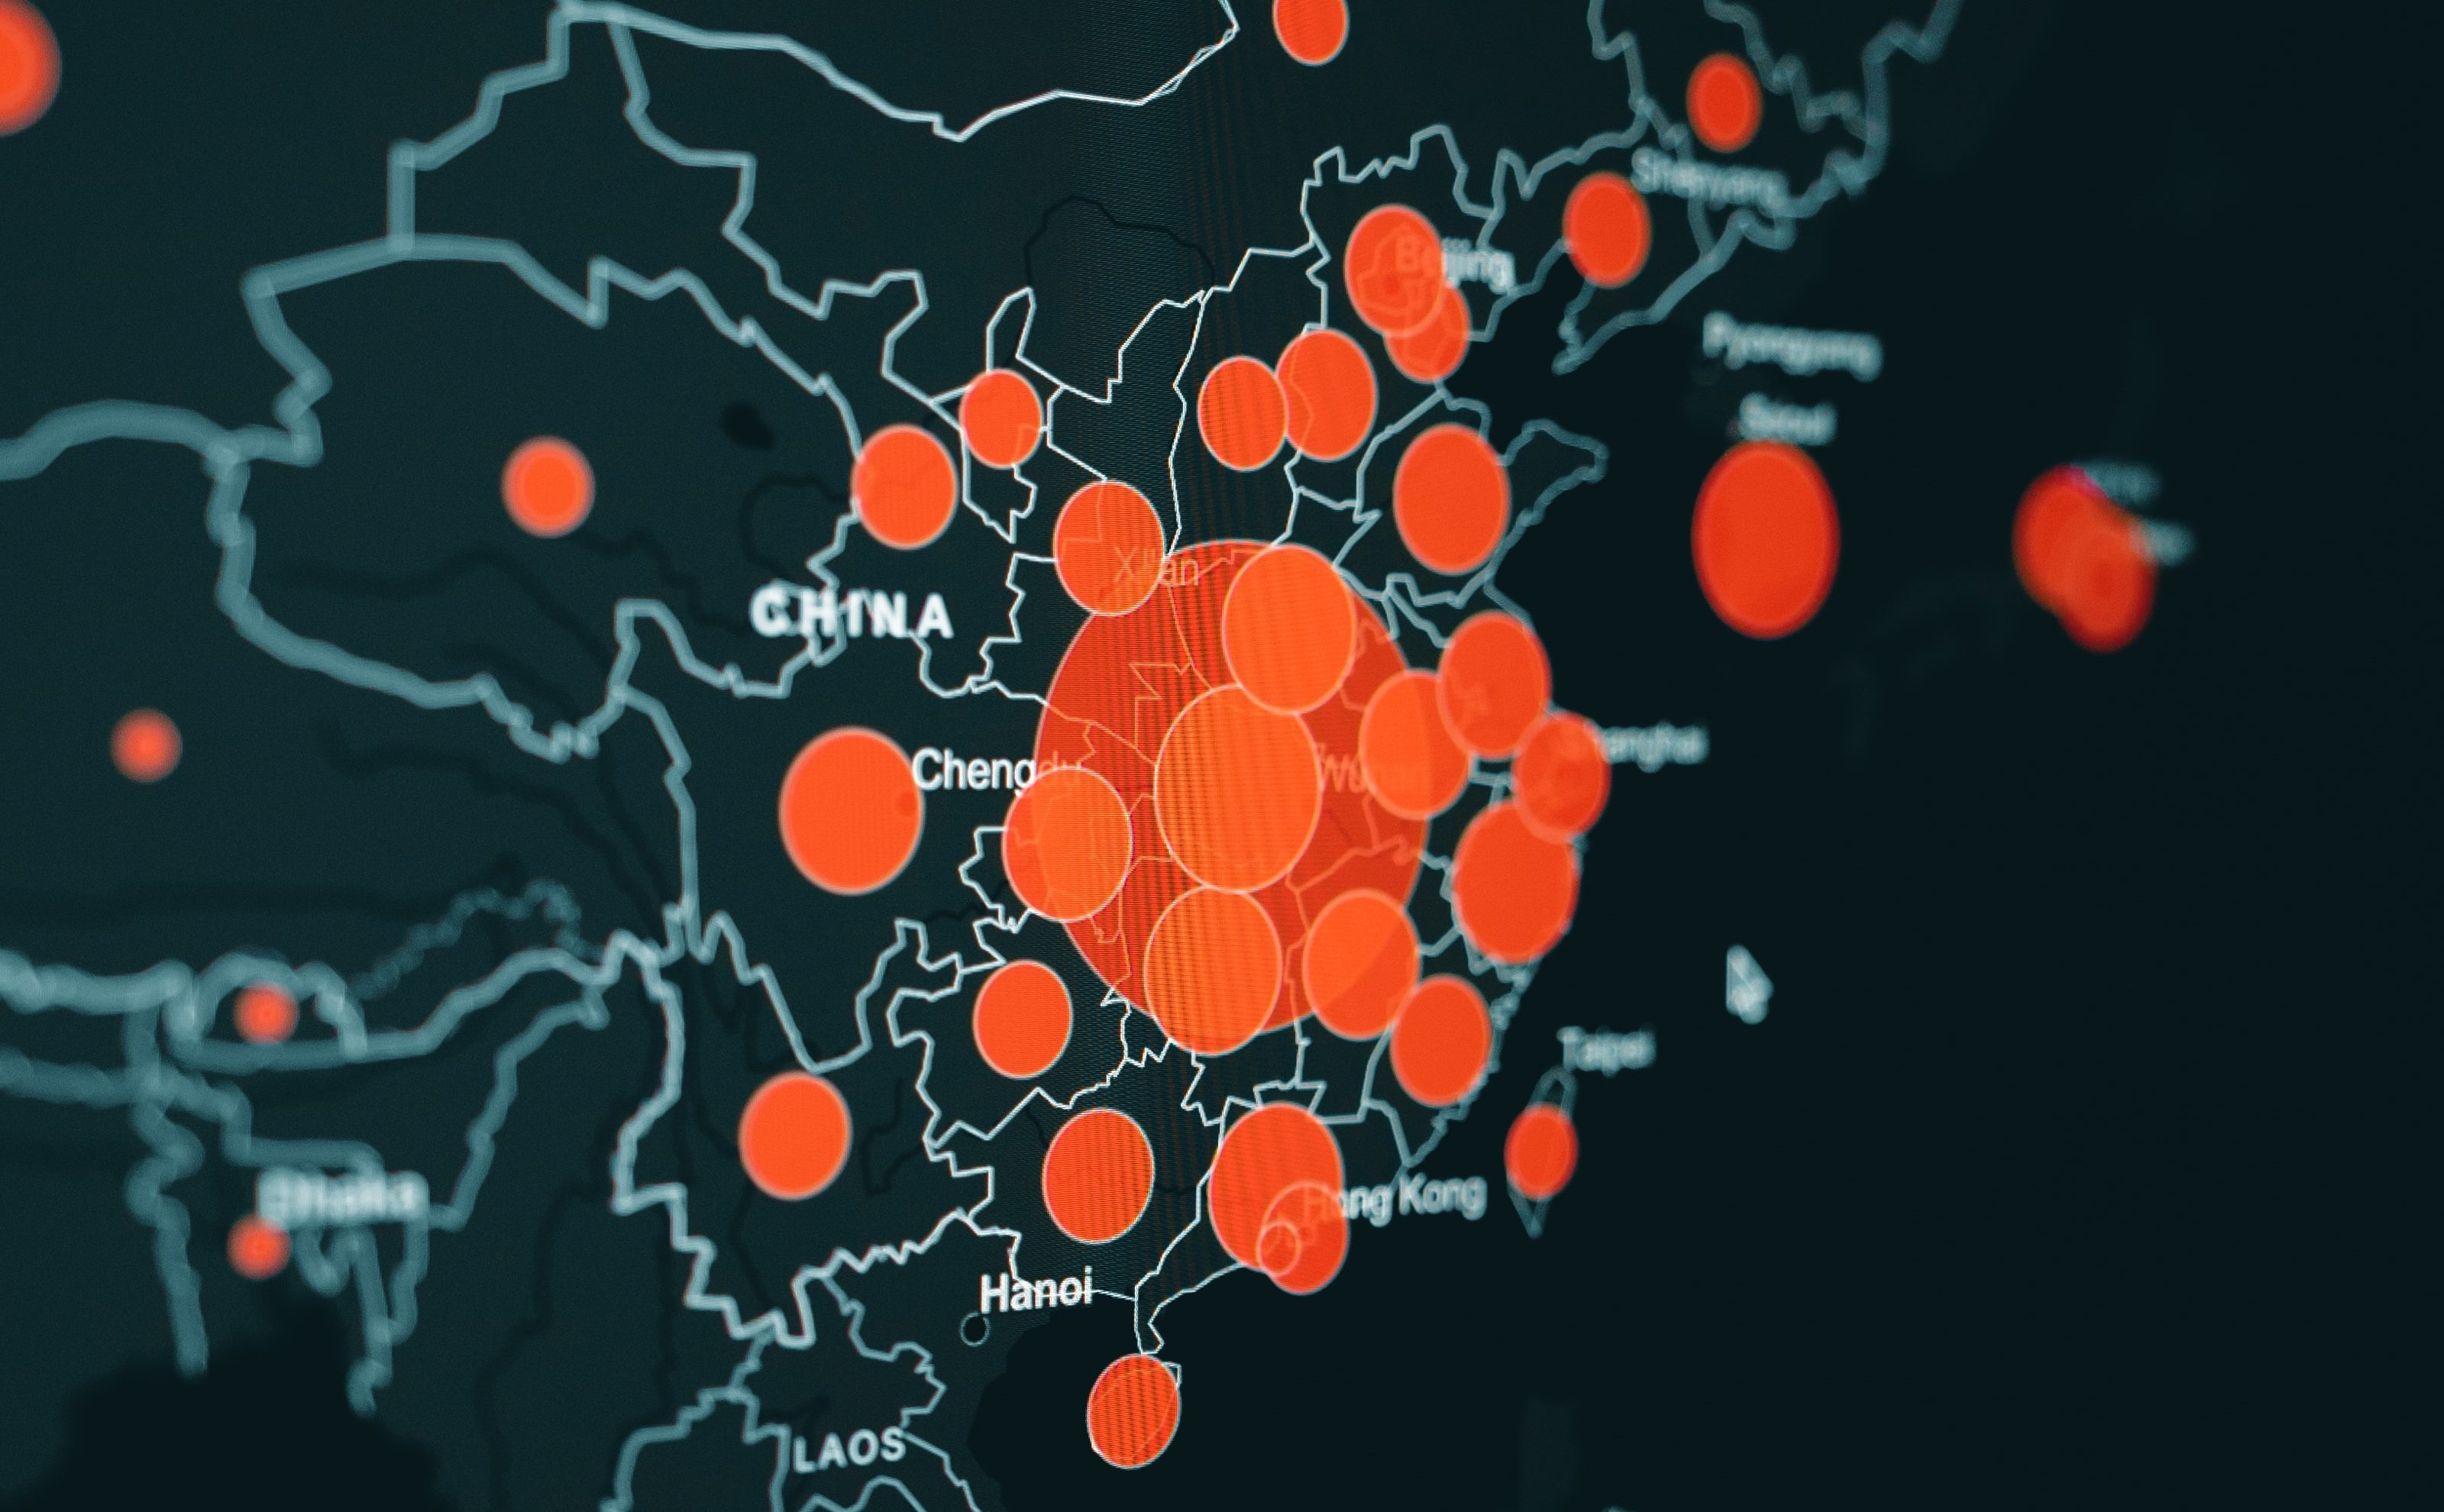 Winners and survivors from the pandemic, Q1 sheds light on China’s economic recovery